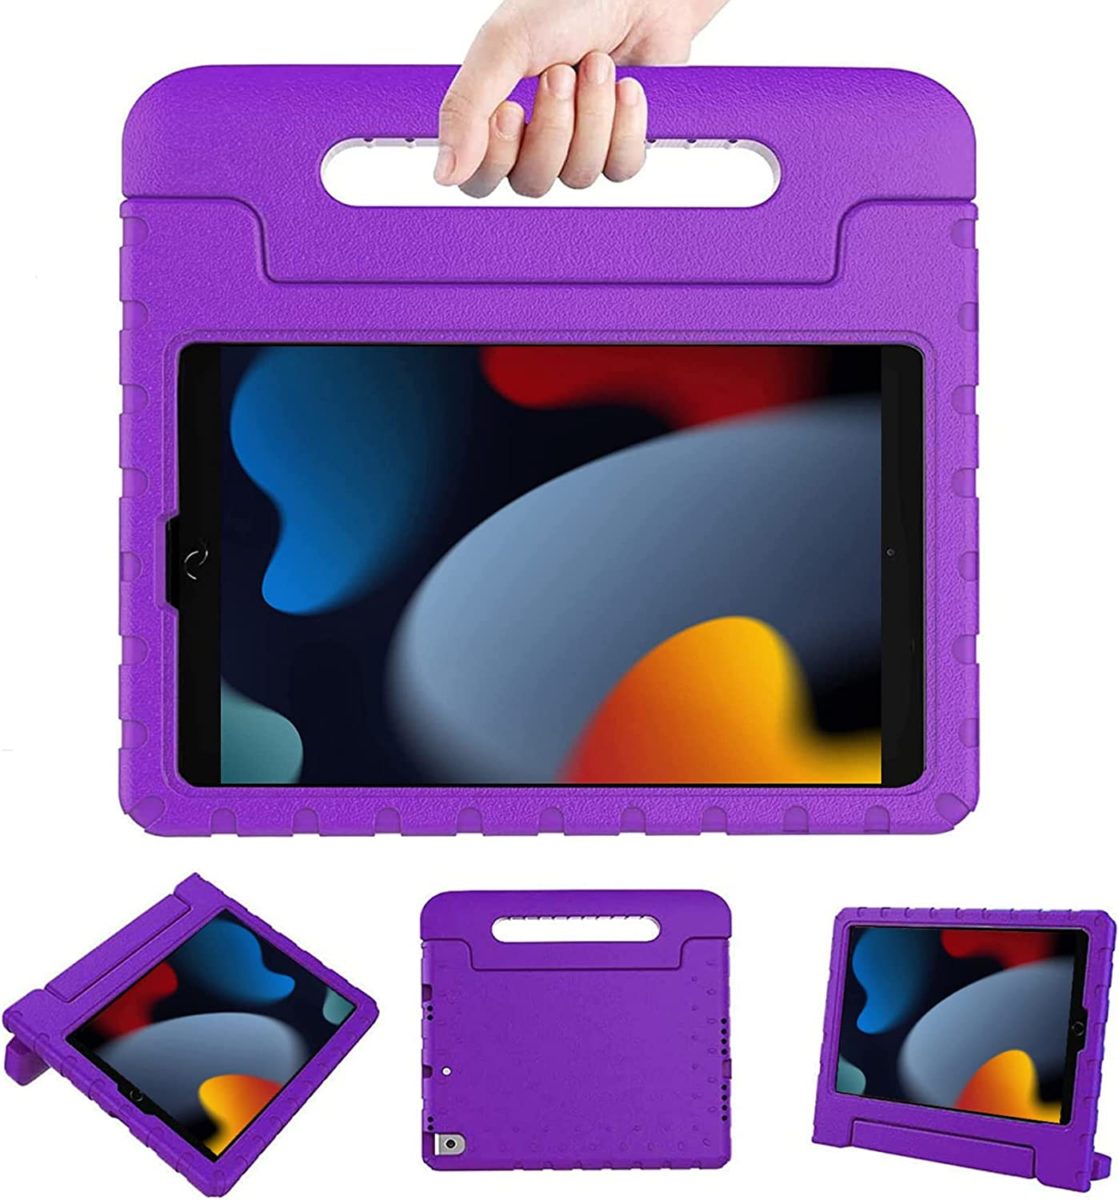 7 best ipad cases for kids